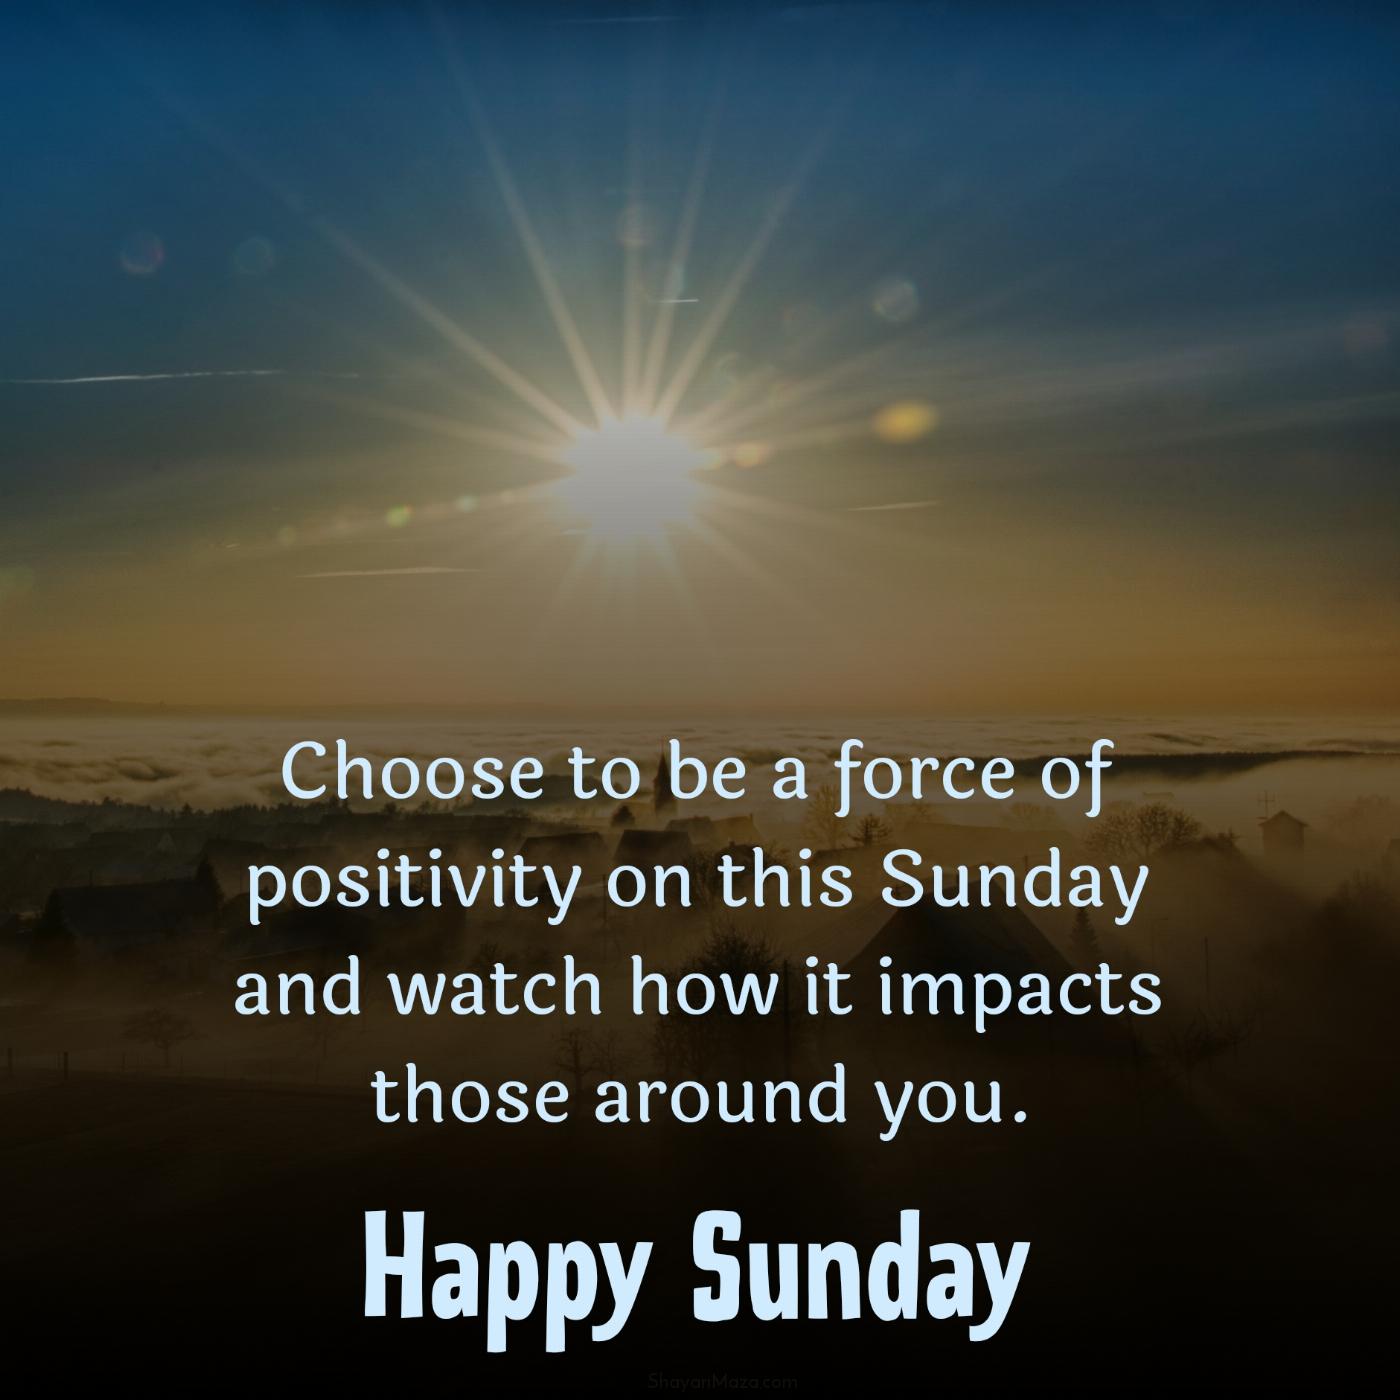 Choose to be a force of positivity on this Sunday